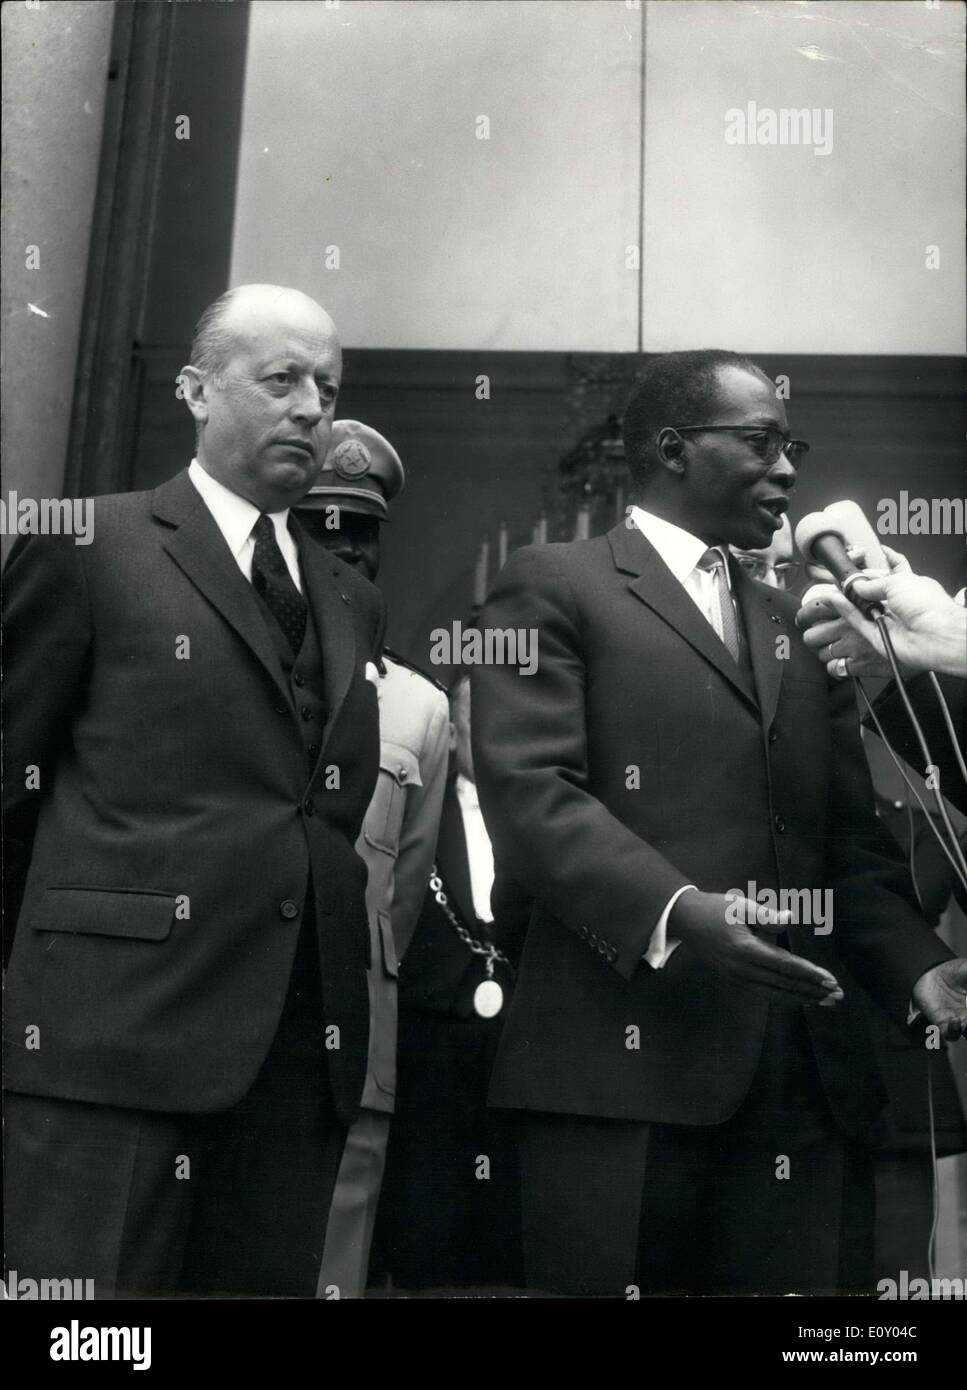 Apr. 18, 1968 - President Leopold Senghor gave an interview to reporters as he left the Elysee Palace weher he had lunch with General de Gaulle. Secretary General of African Affairs, Jacques Foccart is standing next to him. Stock Photo